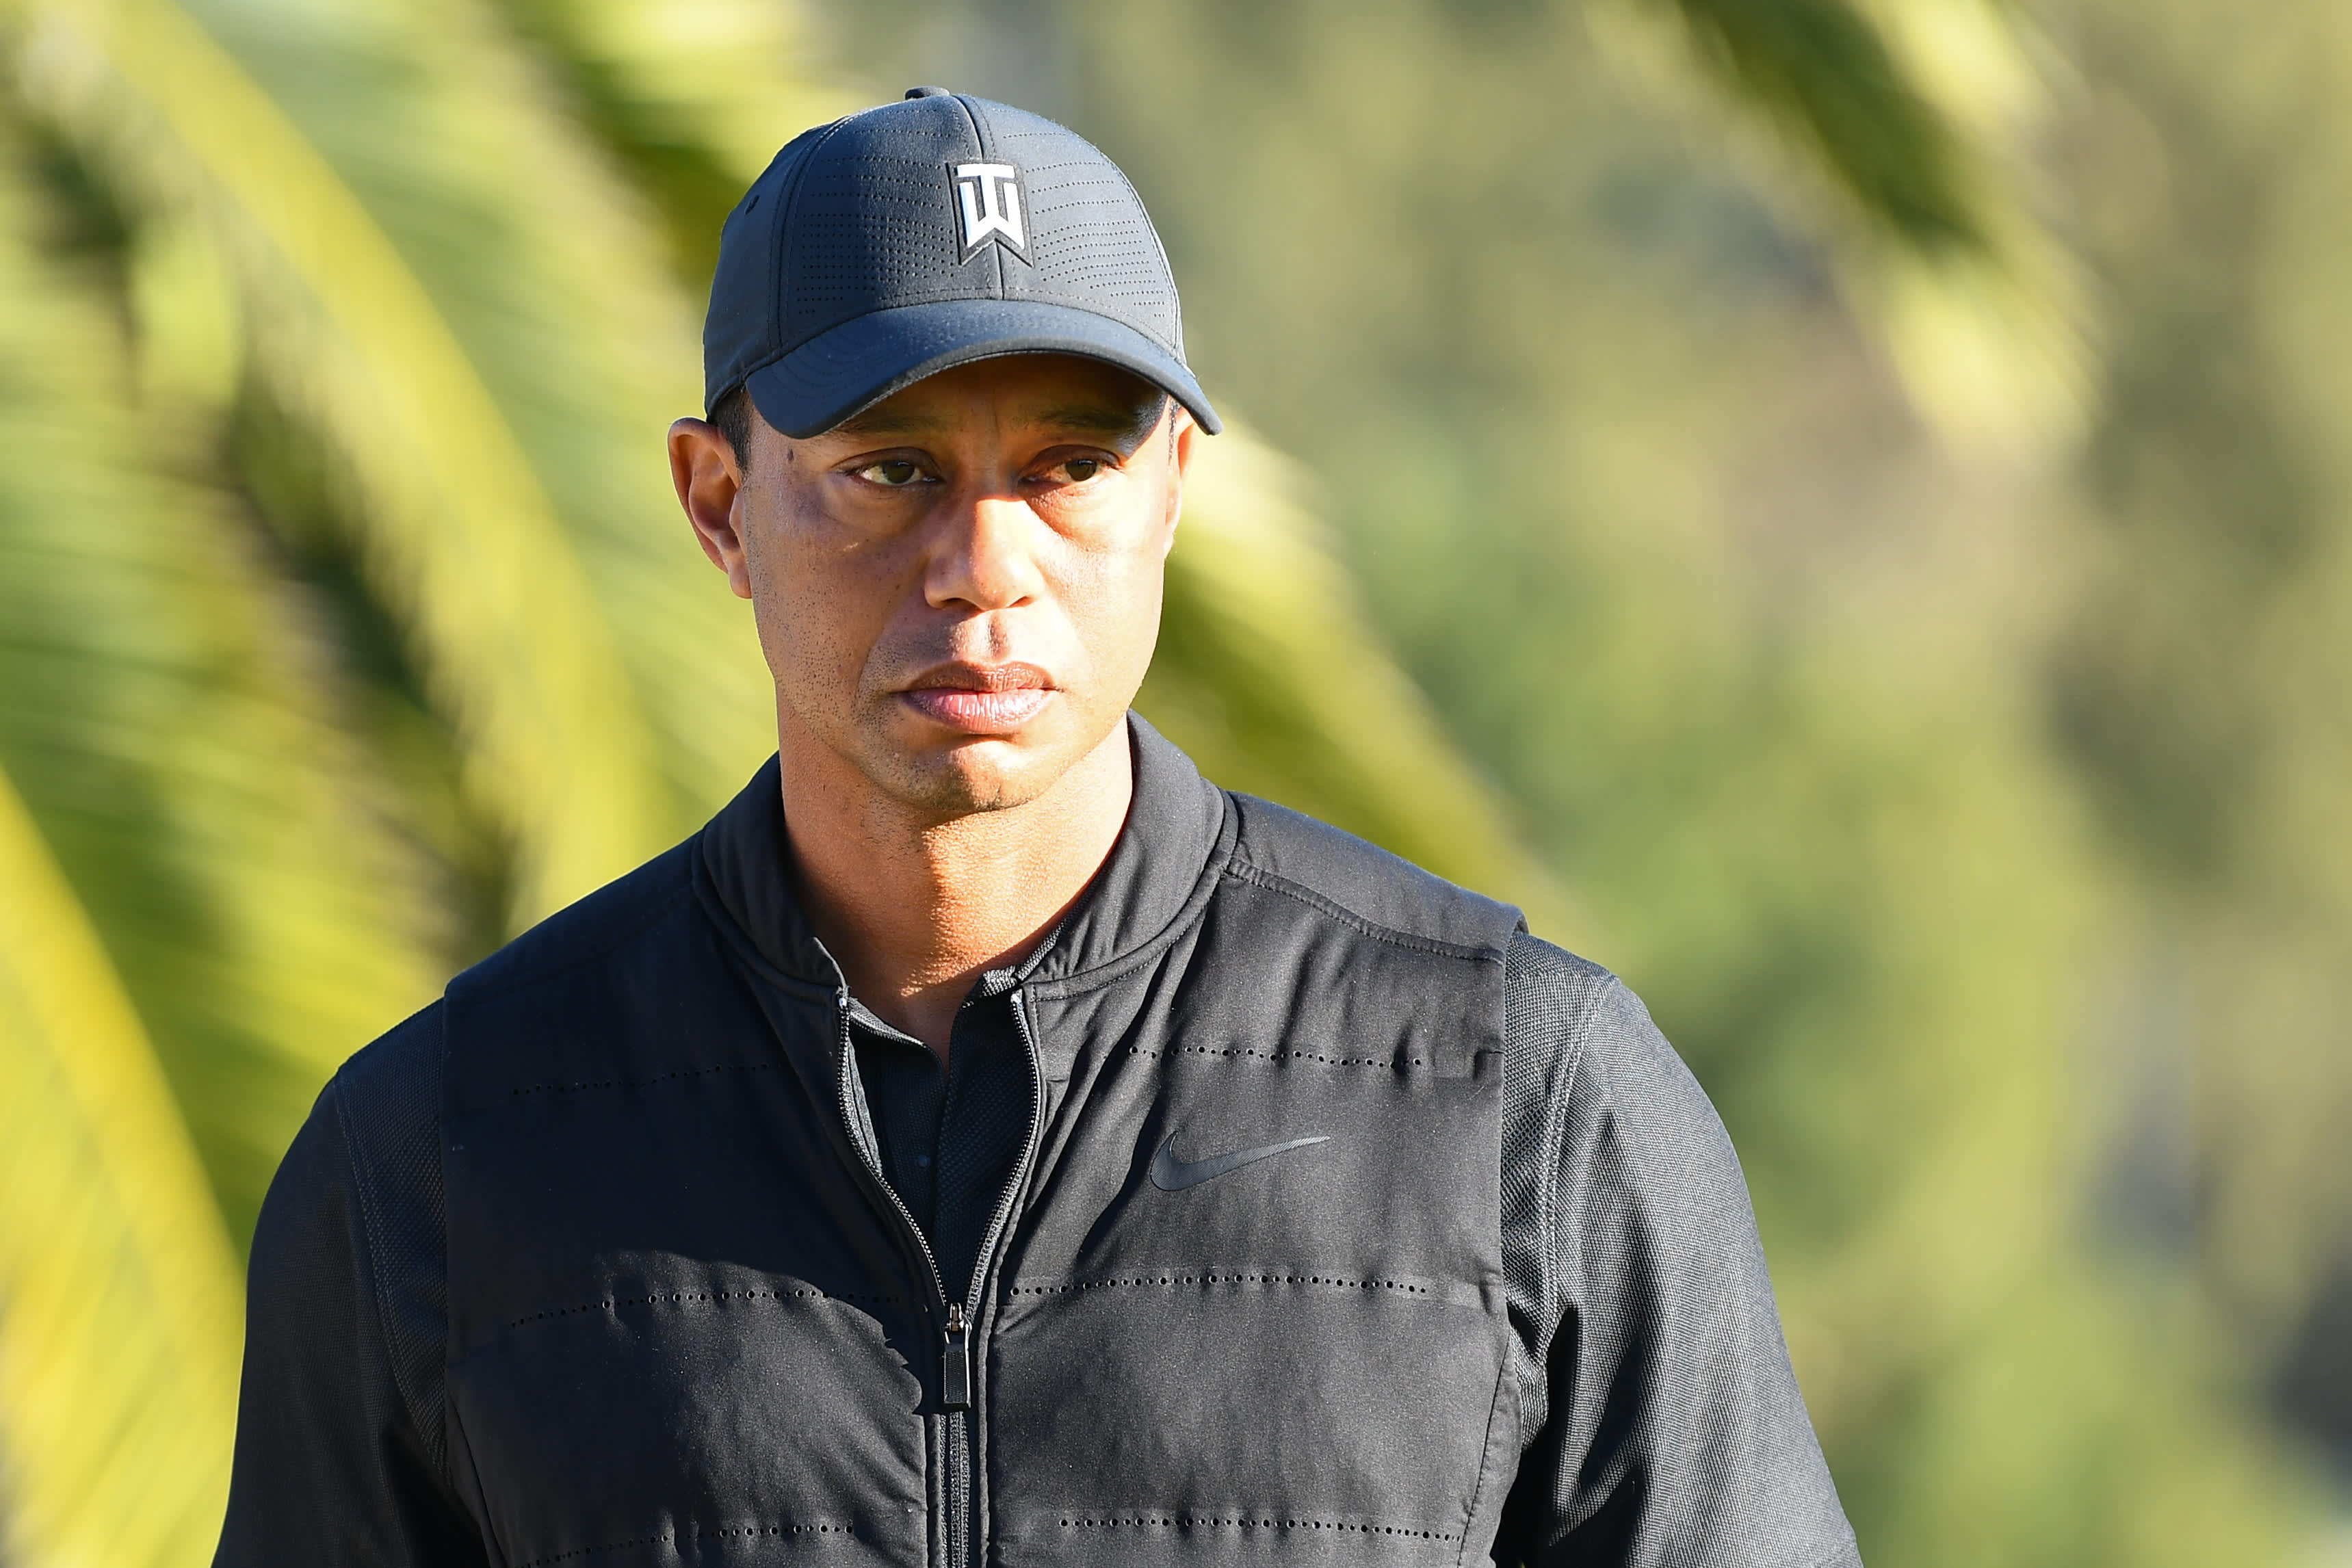 Tiger Woods injuries are “more difficult to heal”, says the surgeon